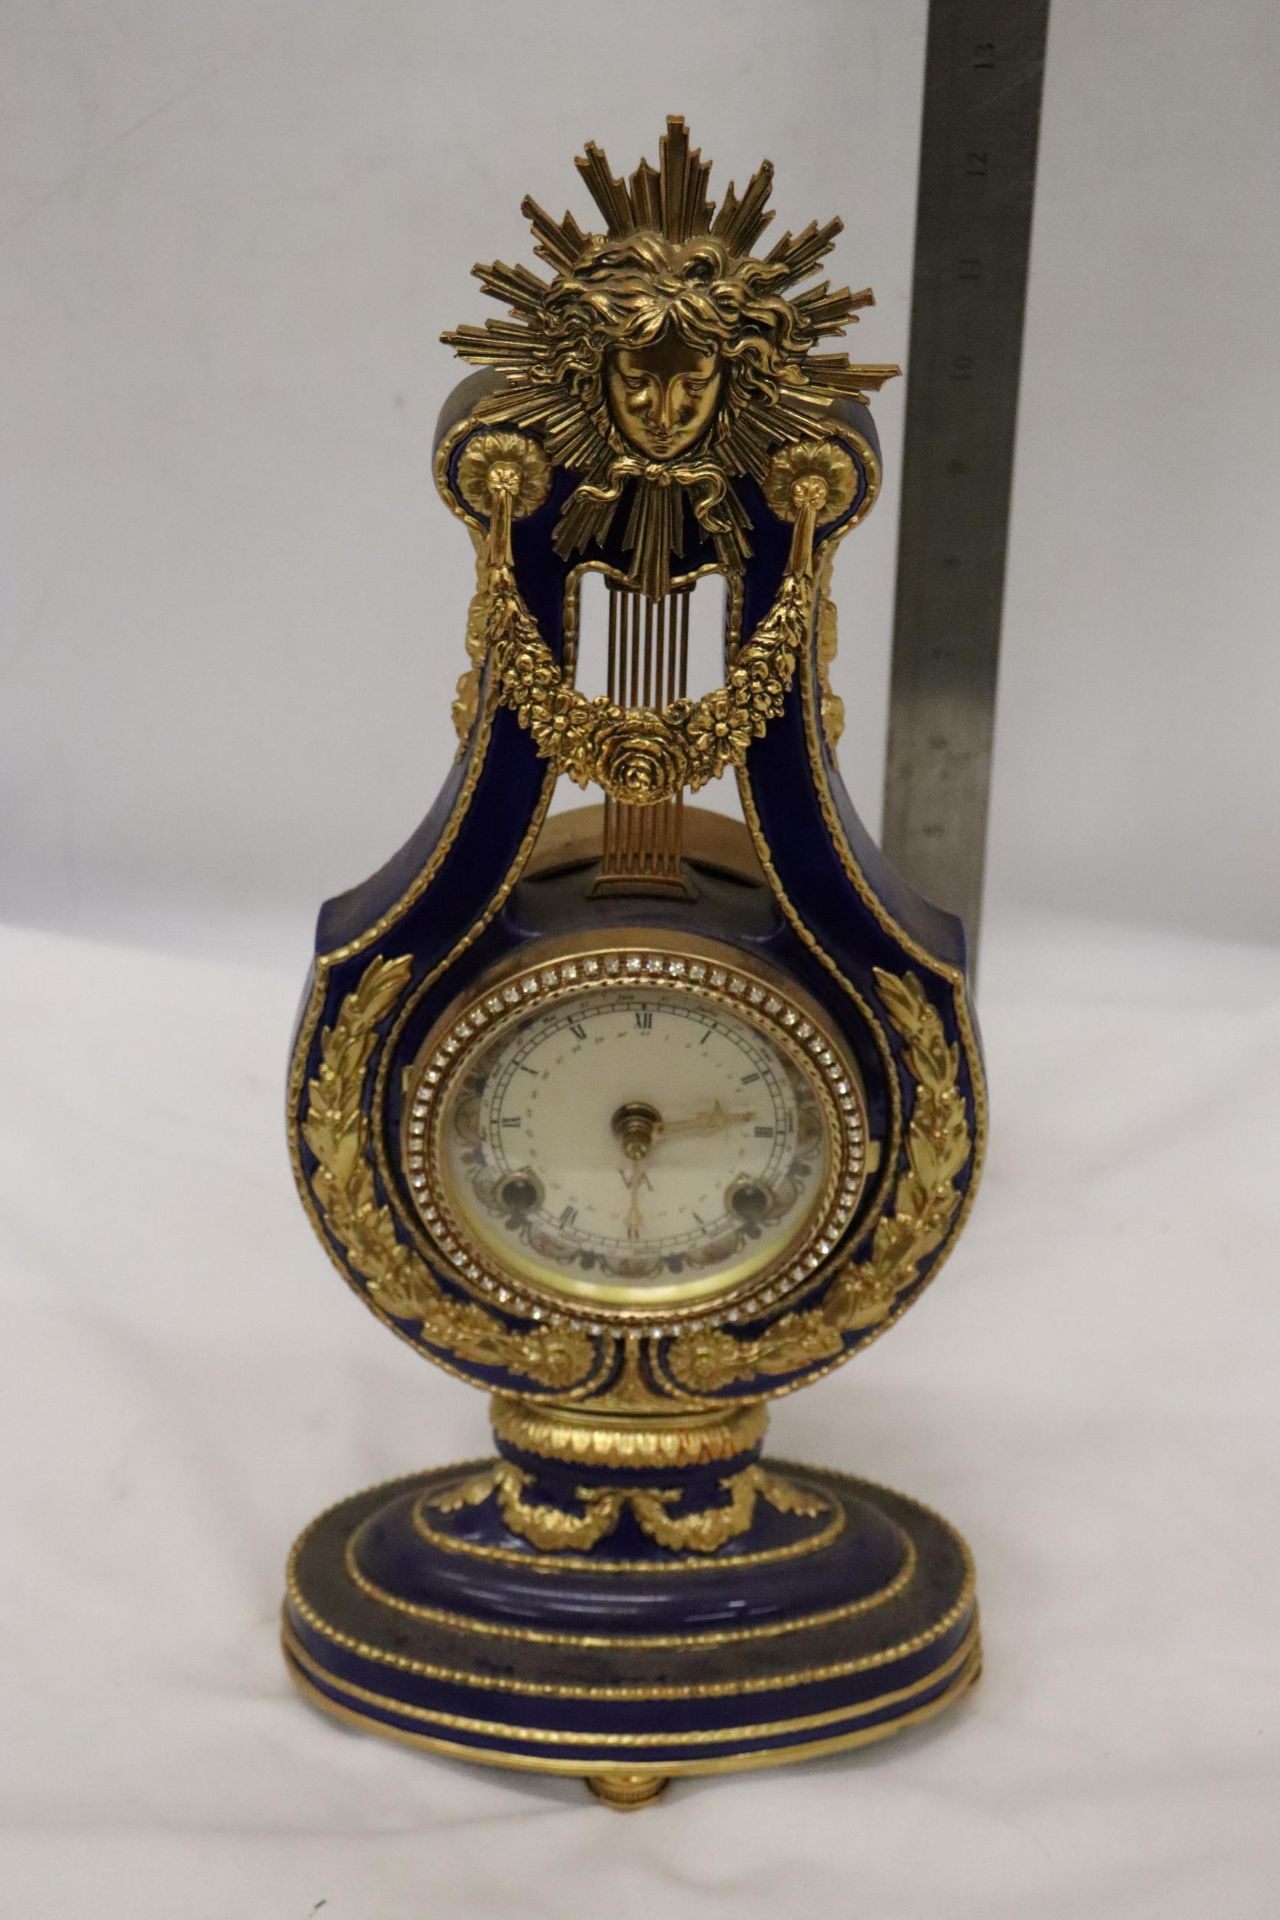 A VICTORIA AND ALBERT MARIE ANTOINETTE STYLE SUN KING GILT METAL MOUNTED PORCELAIN MANTLE CLOCK WITH - Image 7 of 7